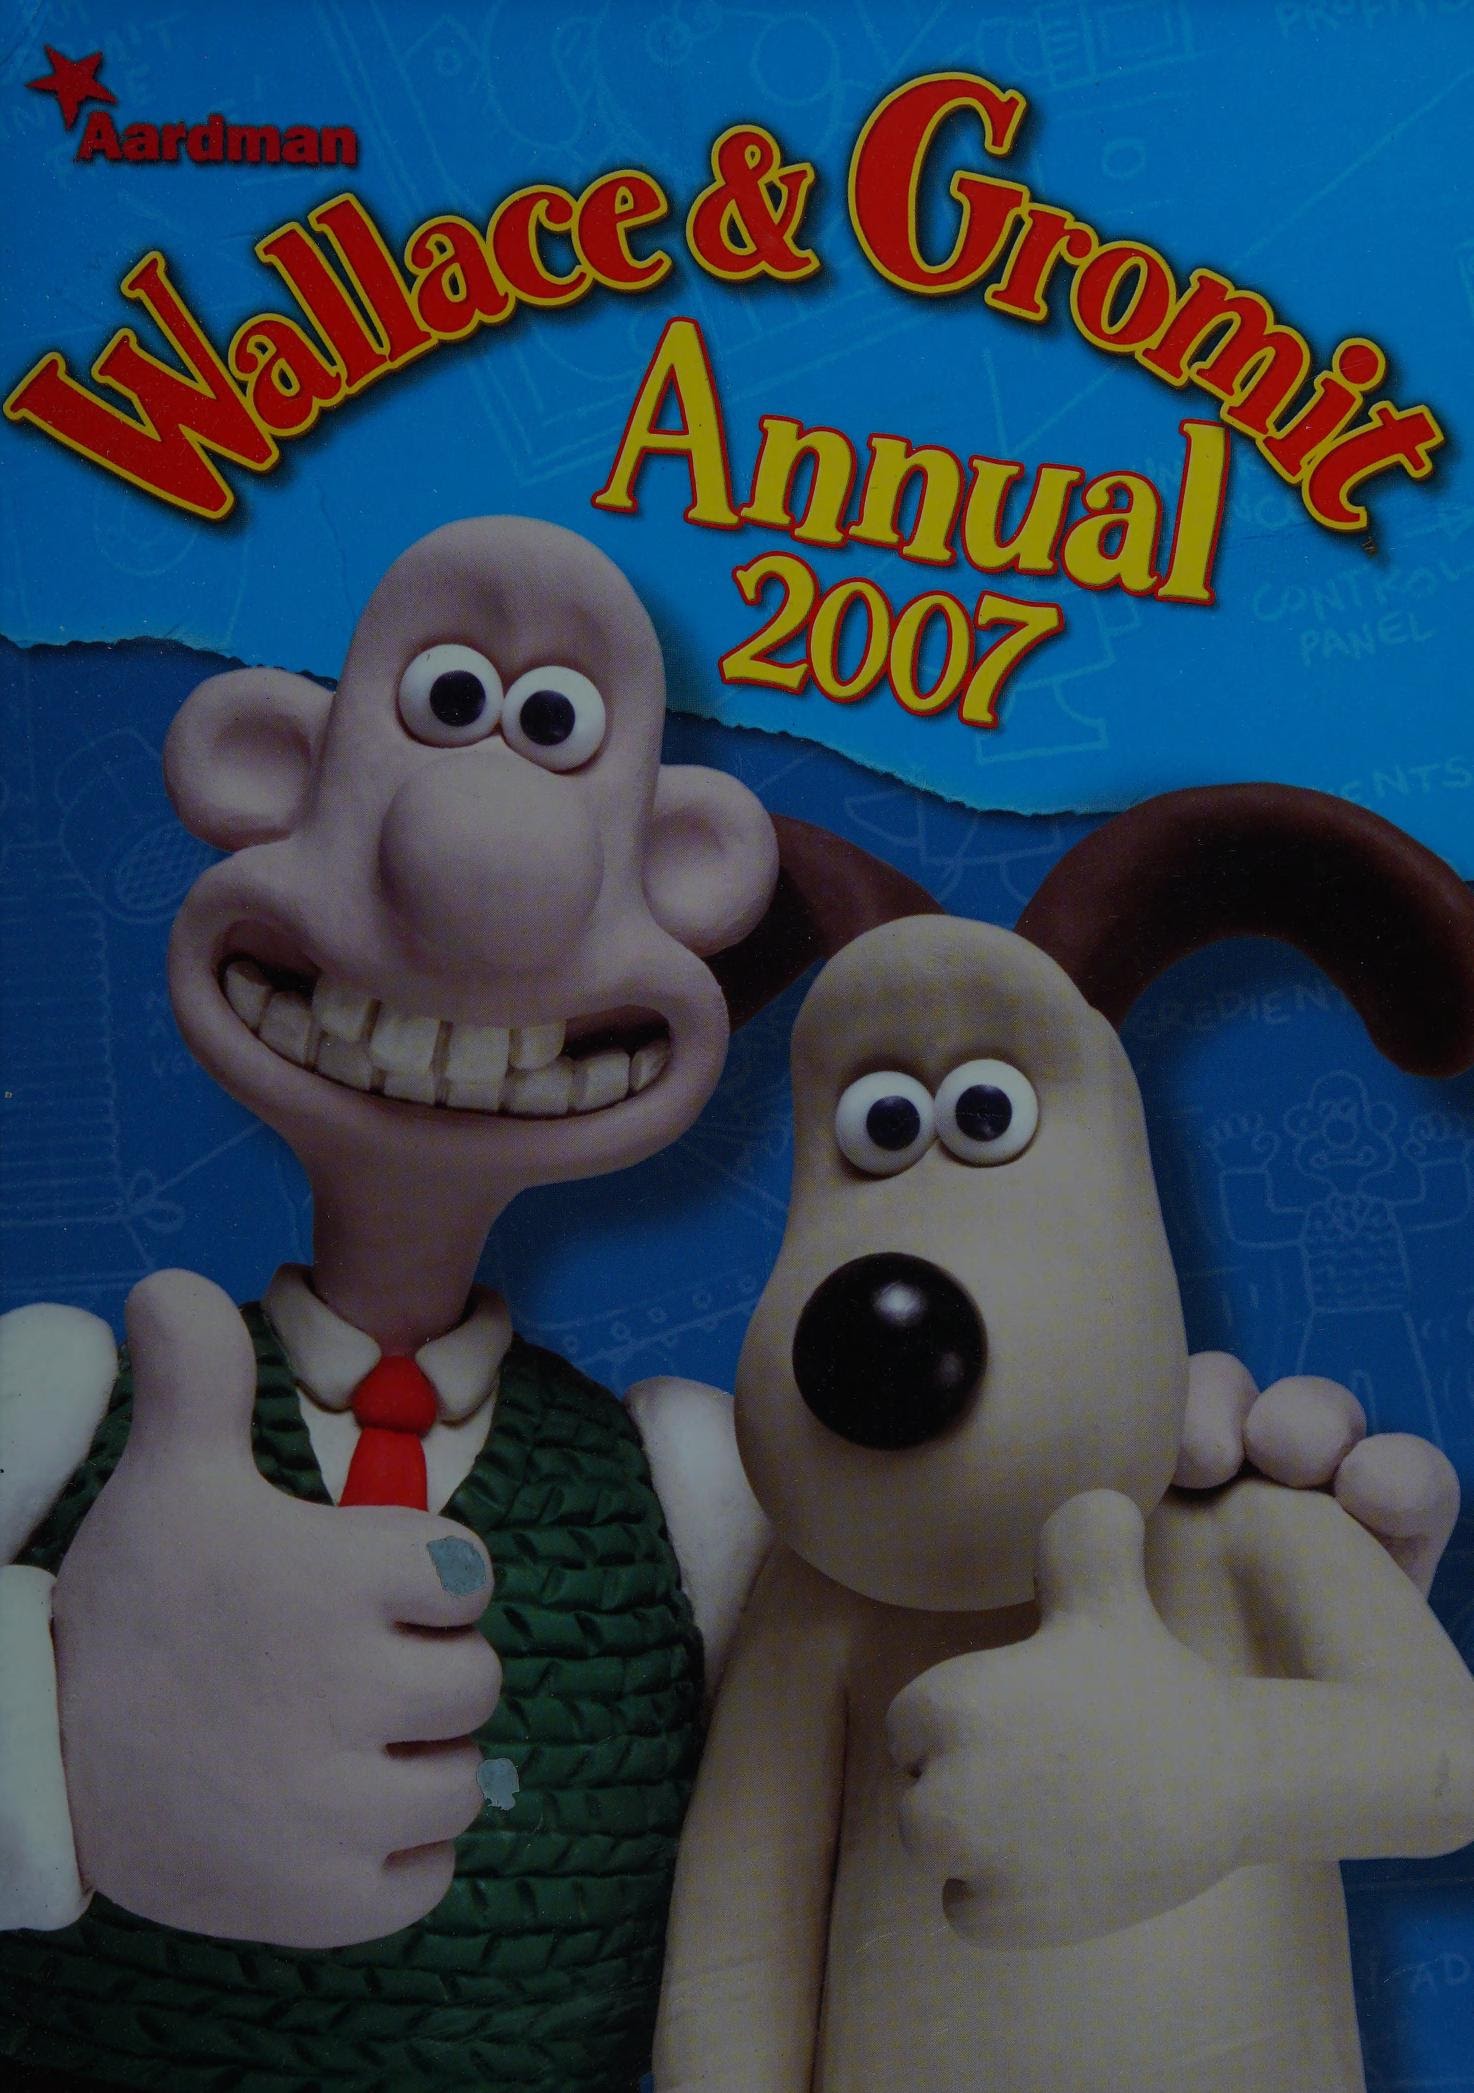 Read online Wallace and Gromit Annual comic -  Issue #2007 - 1